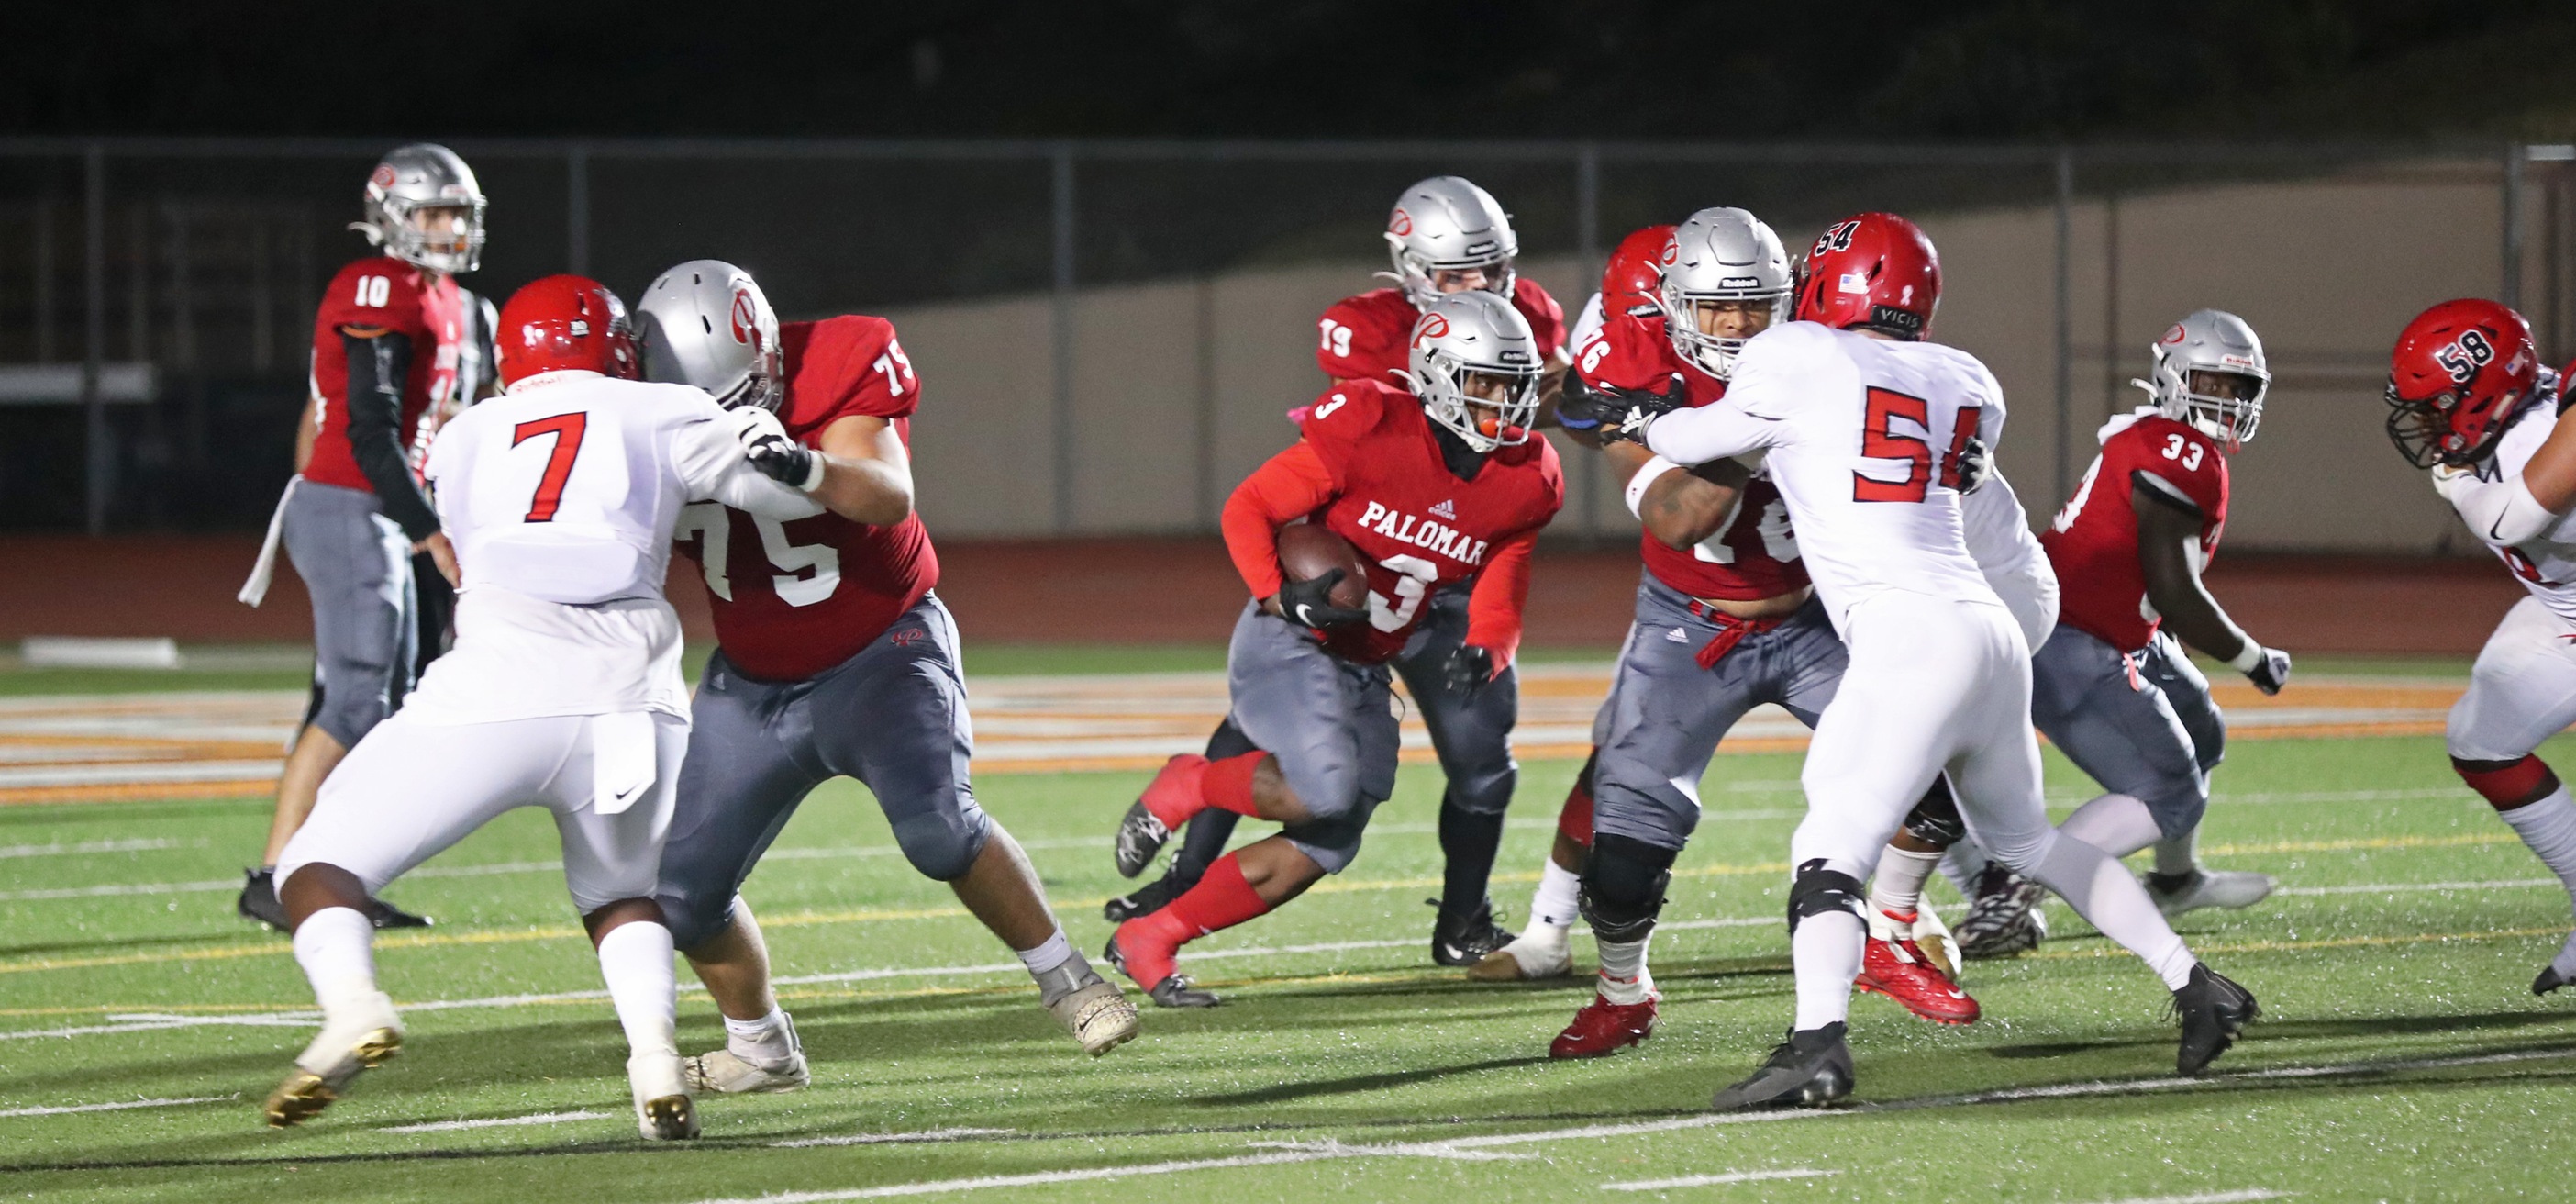 Tawee Walker (No 3) leads the running back group with 508 yards on 111 carries. Photo by Hugh Cox.